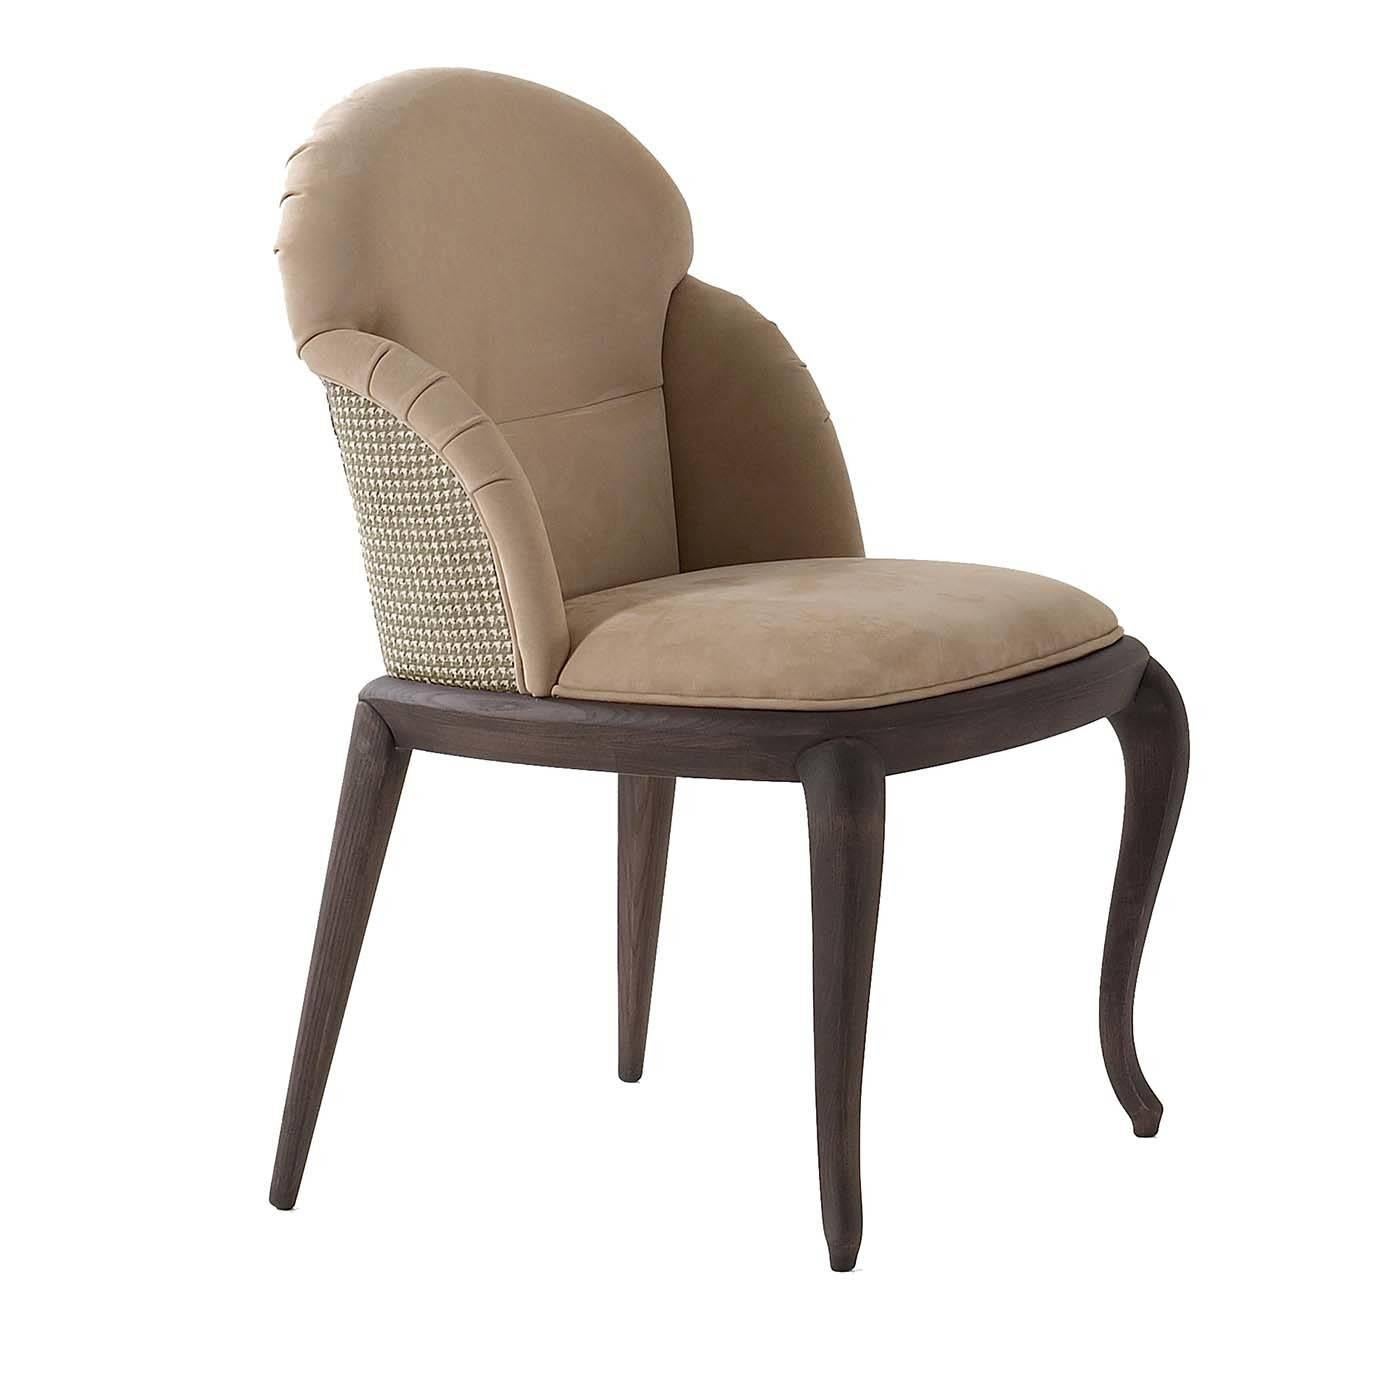 Sally Chair in Beige